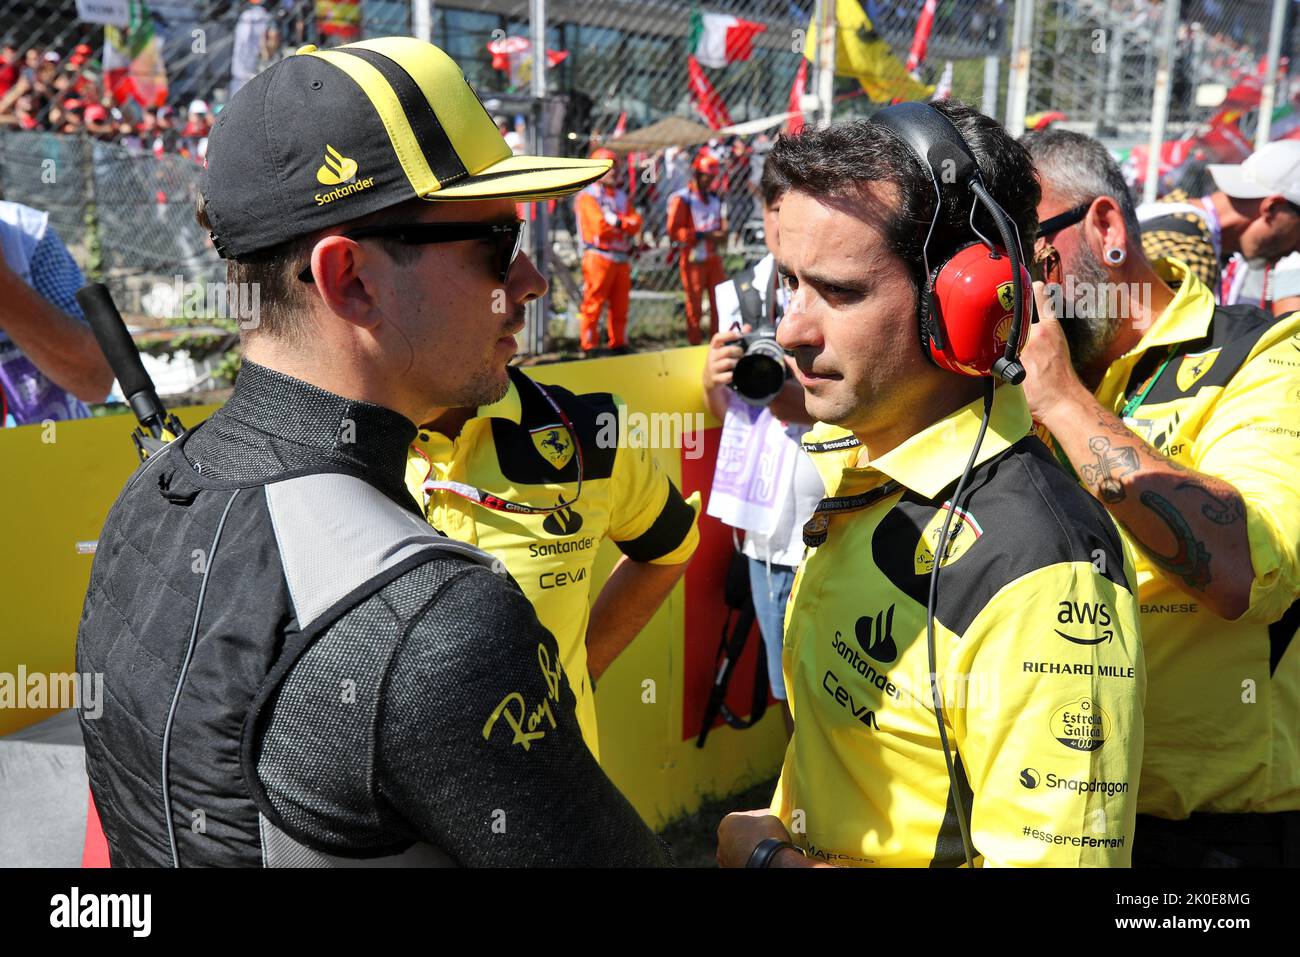 Monza, Italy. 11th Sep, 2022. Charles Leclerc (MON) Ferrari on the grid. Italian Grand Prix, Sunday 11th September 2022. Monza Italy. Credit: James Moy/Alamy Live News Stock Photo